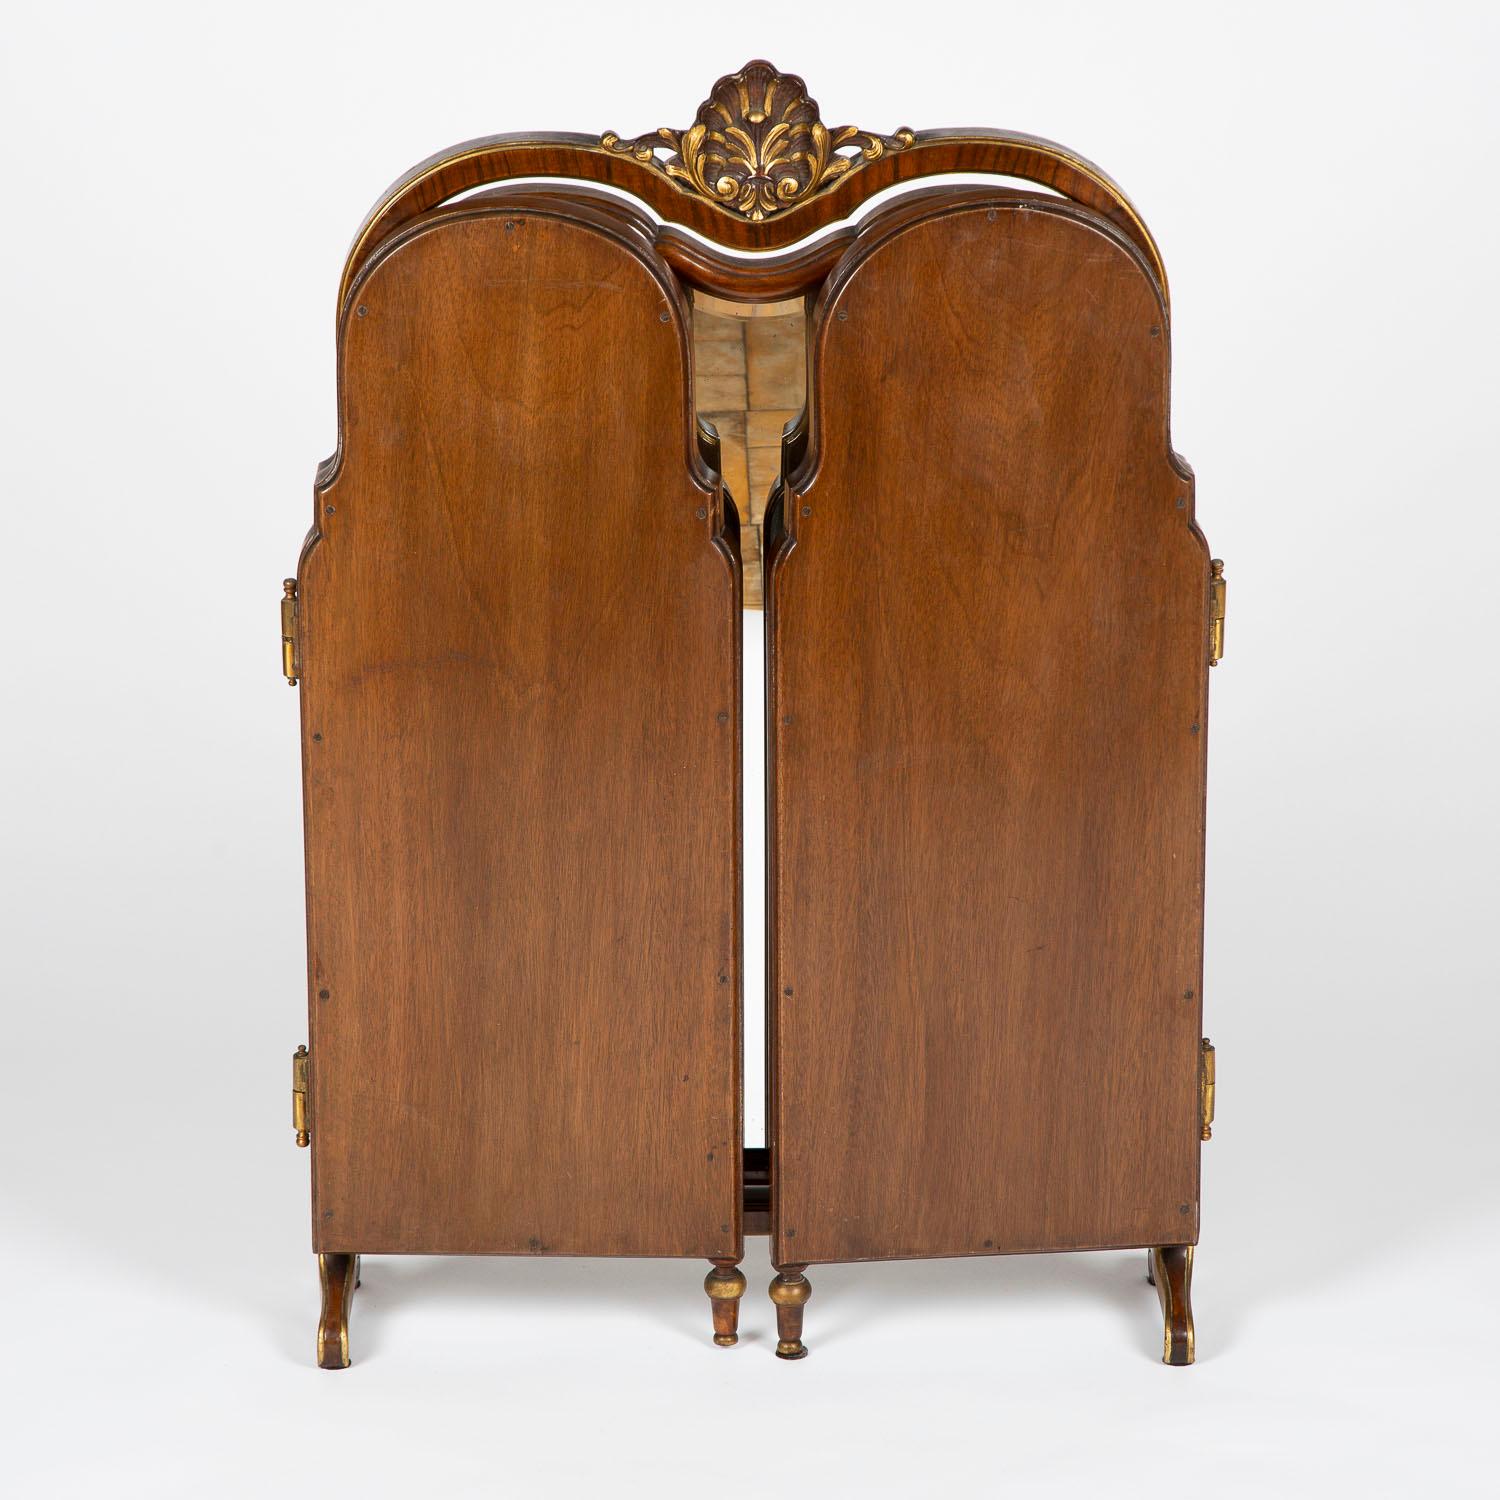 A French carved walnut folding tripartite dressing table mirror with gilt decoration.

The 3 mirrors are have beveled edges. The angle of the central mirror can be adjusted, and both the outer mirrors can removed.

Measures: Width when fully